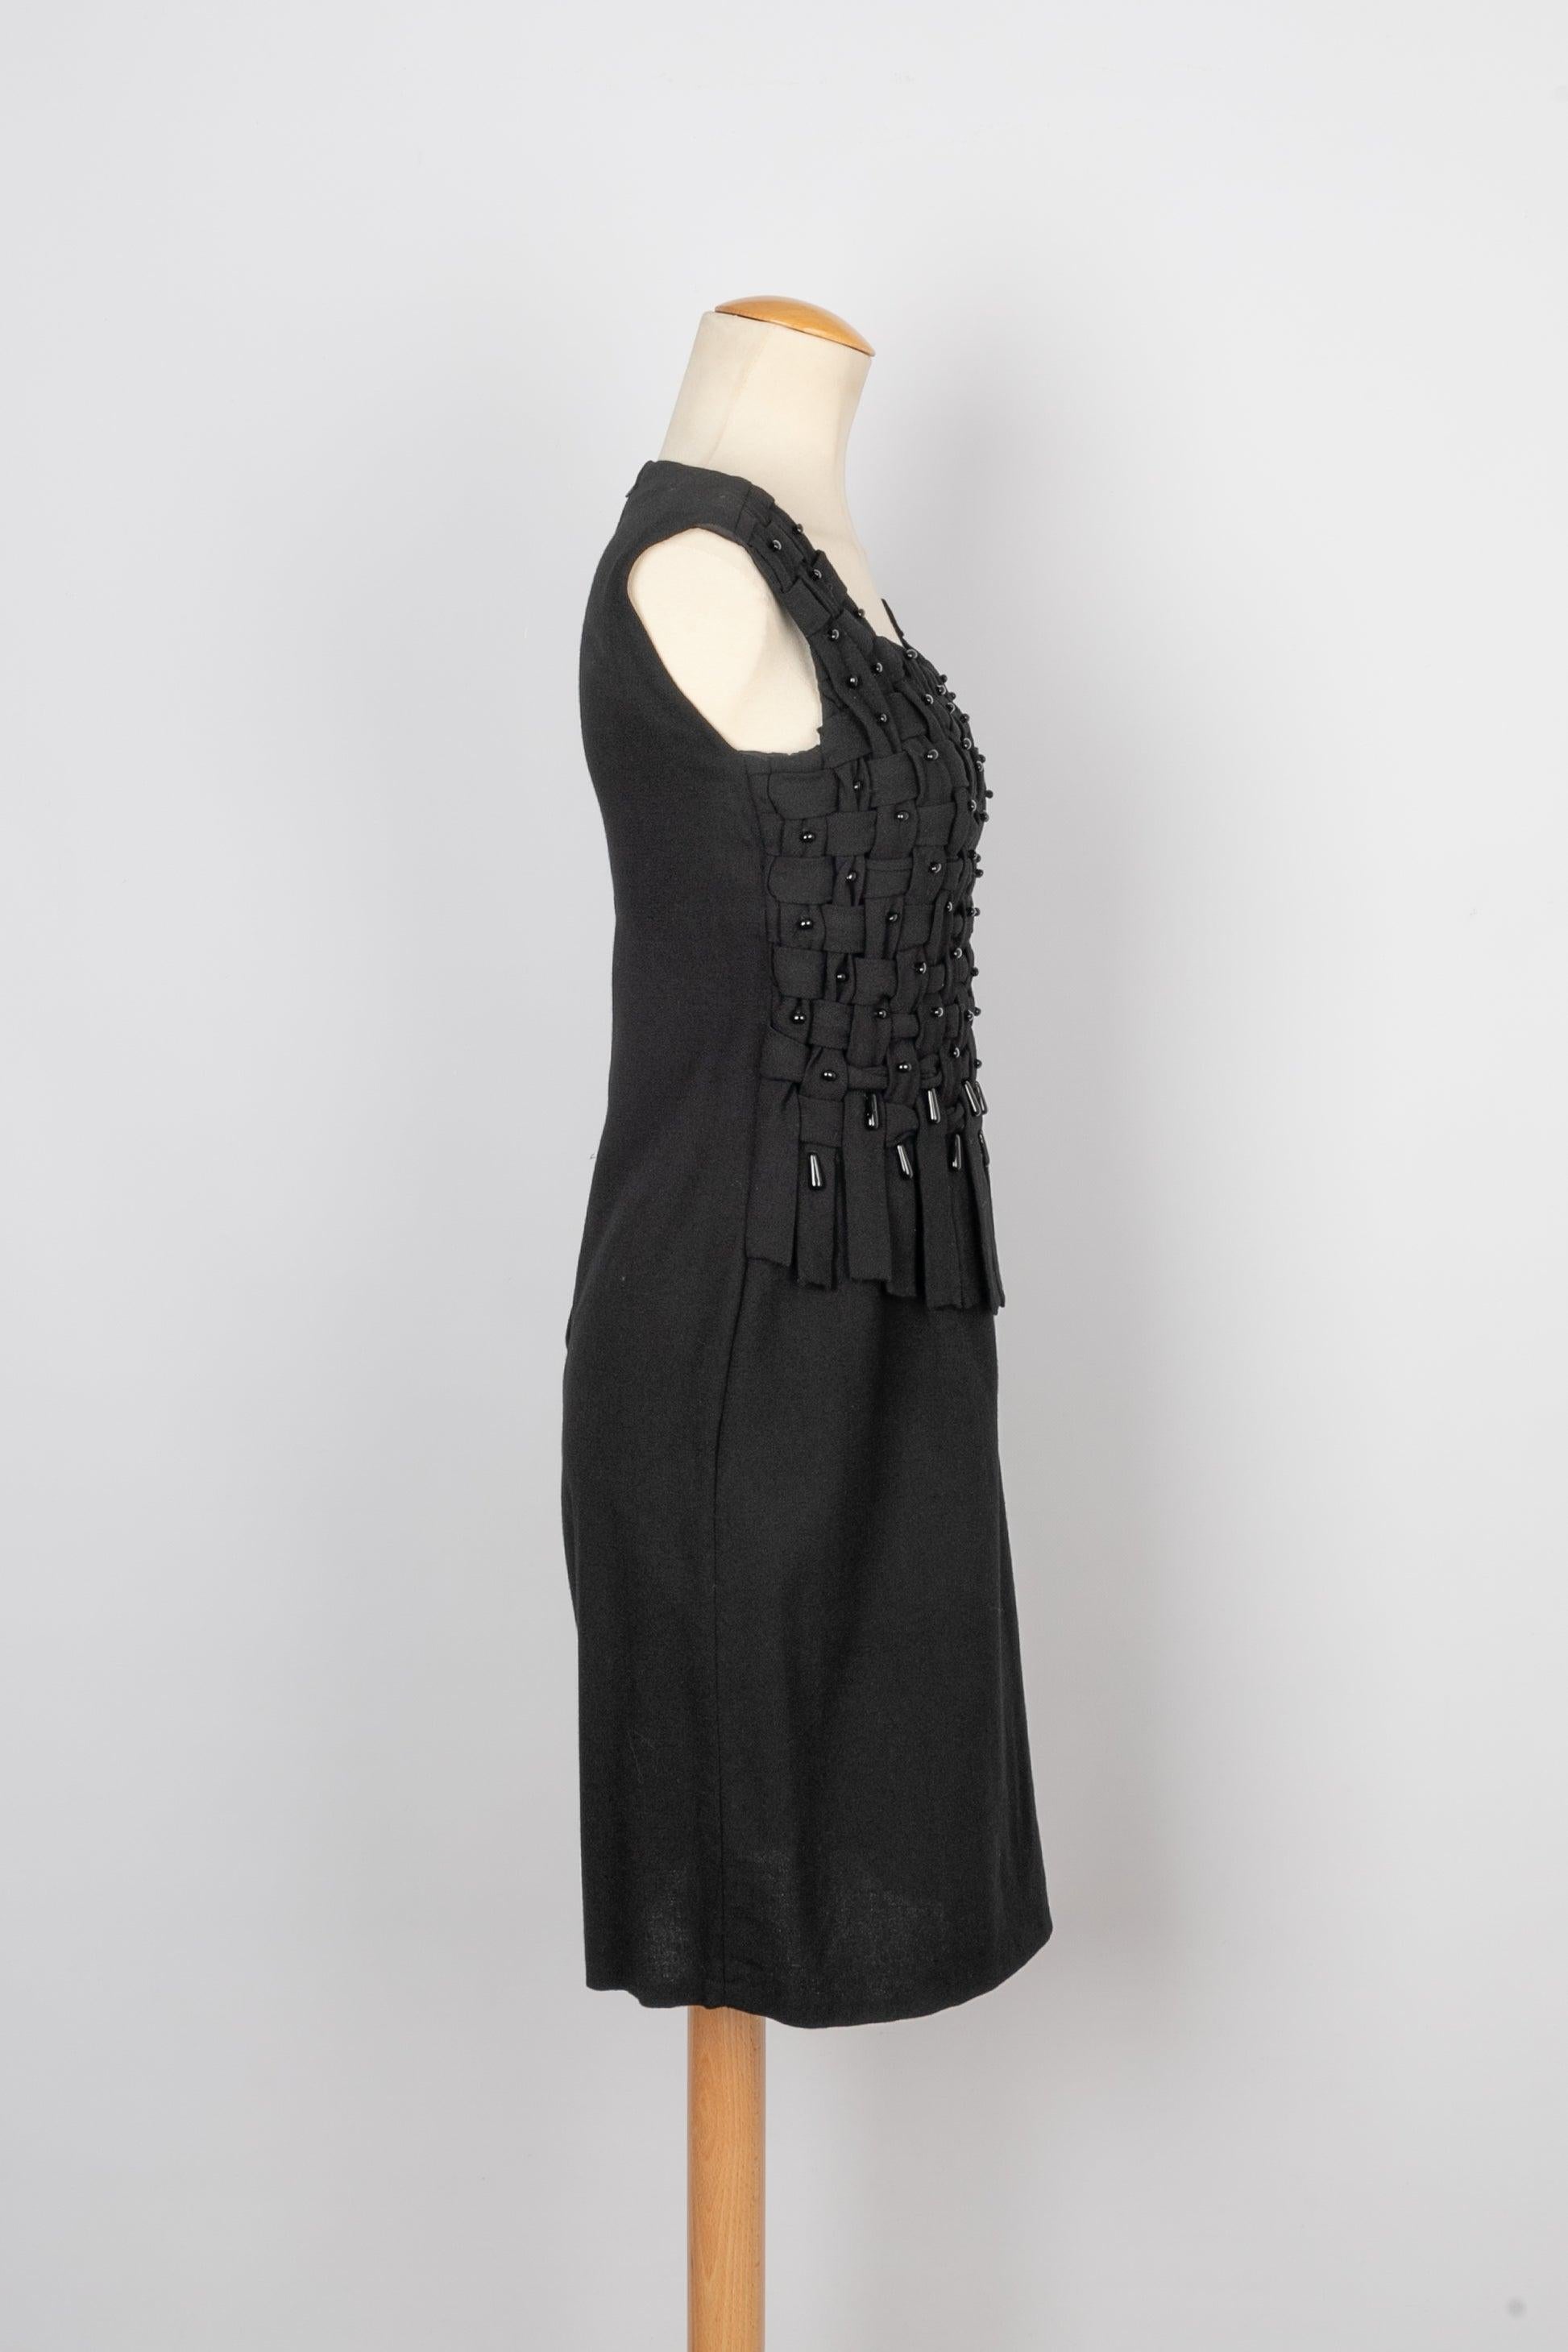 Anonyme - Wool cheesecloth dress sewn with black glass pearls. Piece from the 1950s/1960s. No size nor composition label, it fits a 36FR.

Additional information:
Condition: Very good condition
Dimensions: Chest: 41 cm - Waist: 36 cm - Length: 90